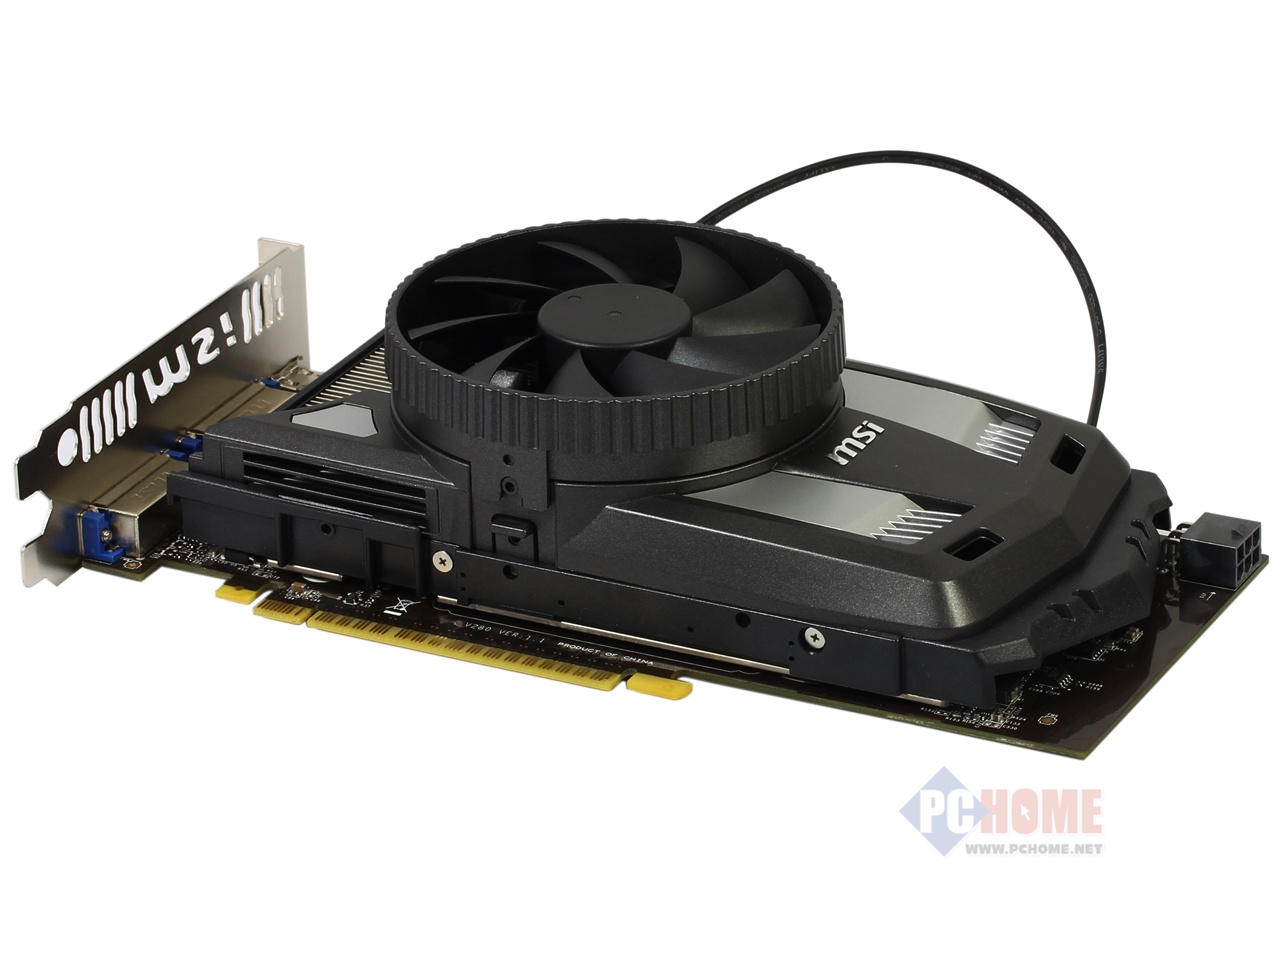 MSI's GTX 650 Power Edition Has TransThermal Cooling